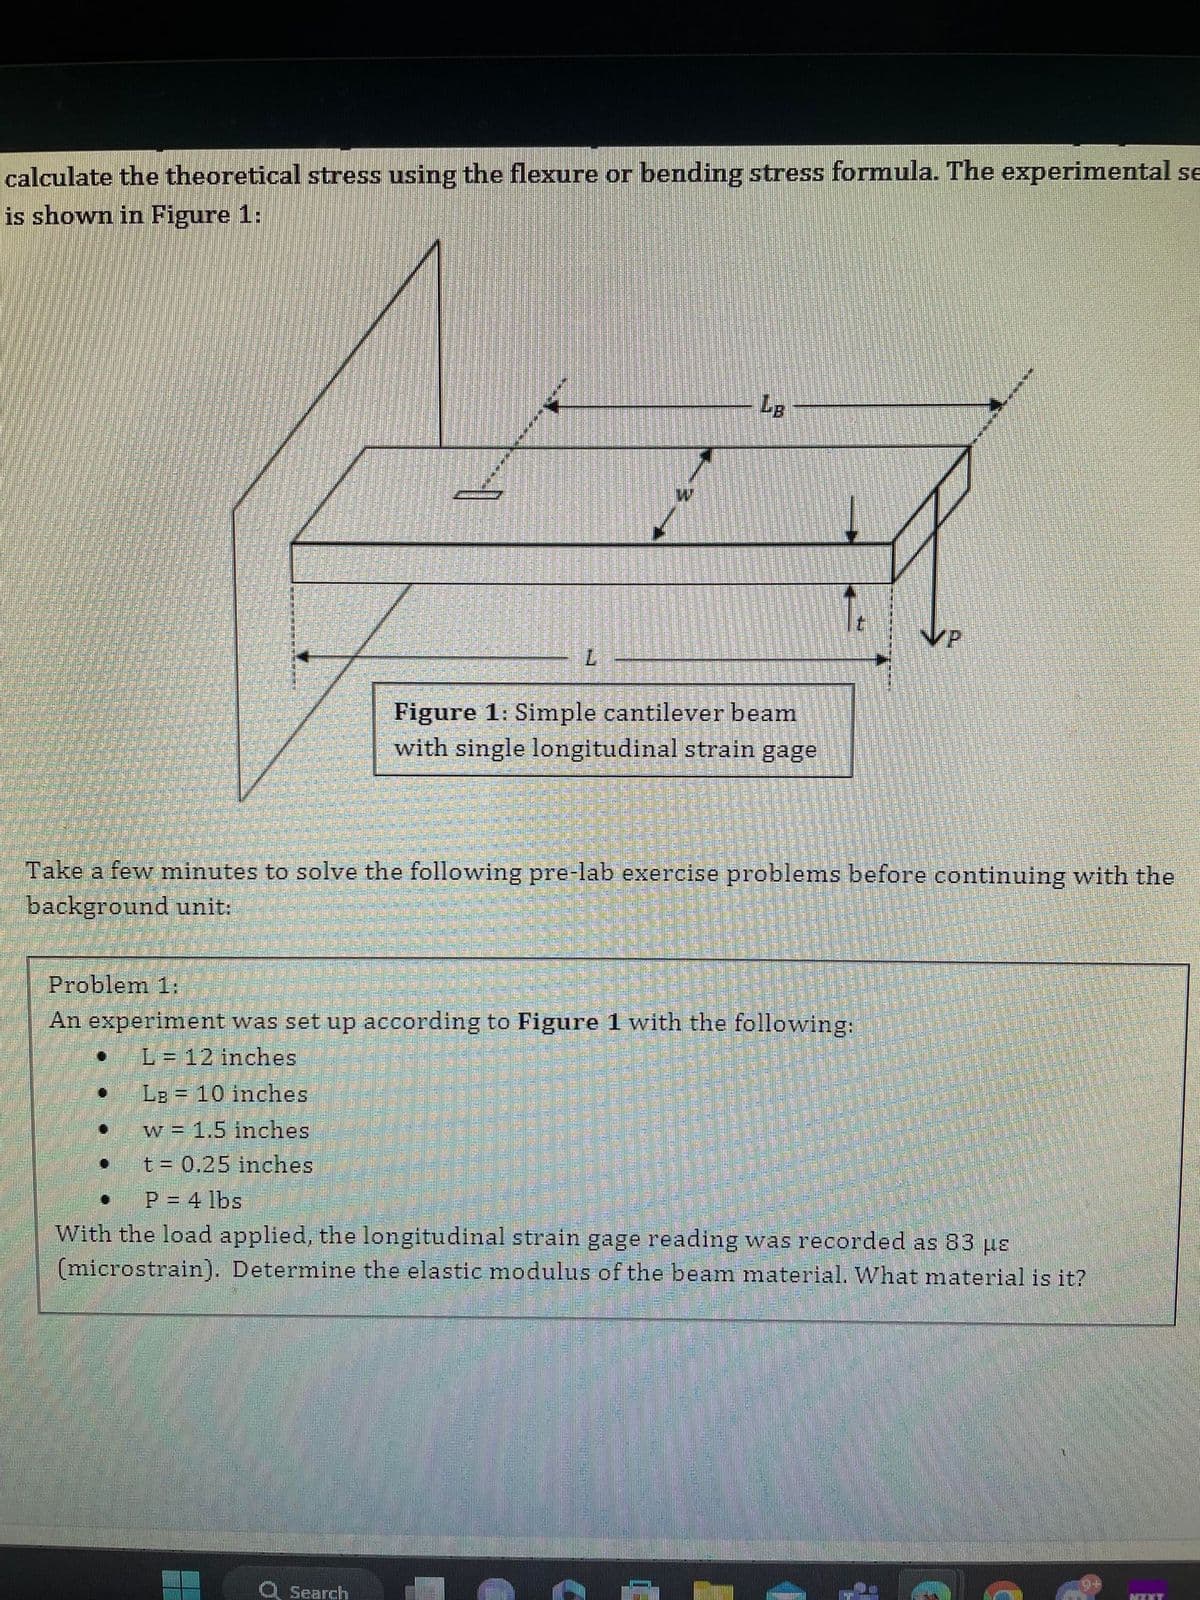 calculate the theoretical stress using the flexure or bending stress formula. The experimental se
is shown in Figure 1:
•
L
LB 10 inches
w = 1.5 inches
t = 0.25 inches
LB
Take a few minutes to solve the following pre-lab exercise problems before continuing with the
background unit:
Problem 1:
An experiment was set up according to Figure 1 with the following:
L=12 inches
Figure 1: Simple cantilever beam
with single longitudinal strain gage
Search
t
P = 4 lbs
With the load applied, the longitudinal strain gage reading was recorded as 83 us
(microstrain). Determine the elastic modulus of the beam material. What material is it?
MEXY